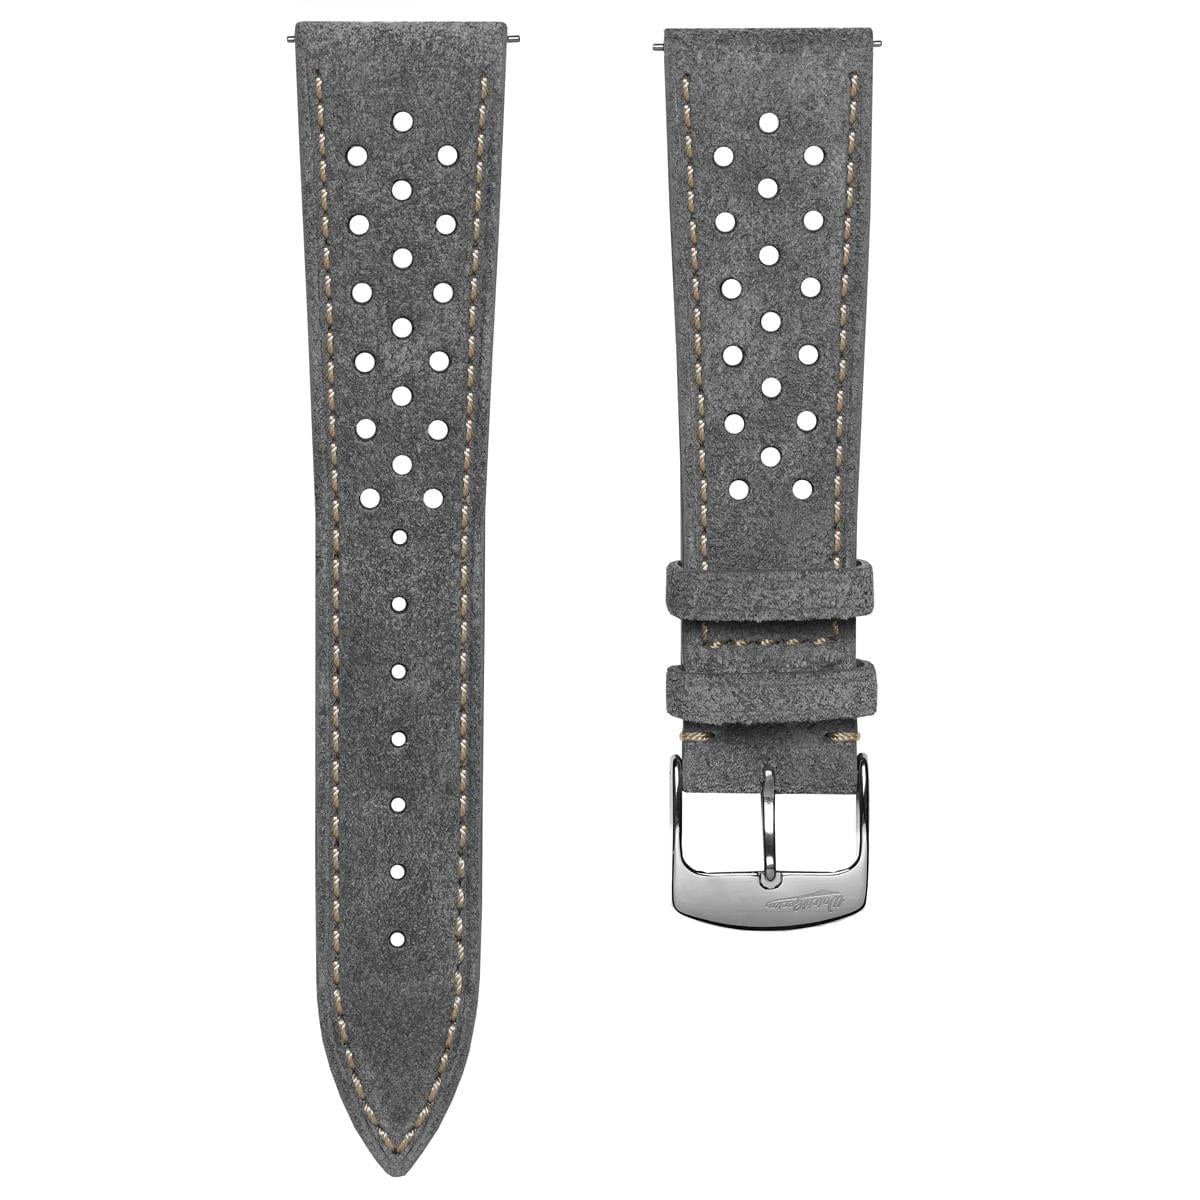 20mm GRAY Grey Vintage Nubuck Leather Racing Watch Strap Band